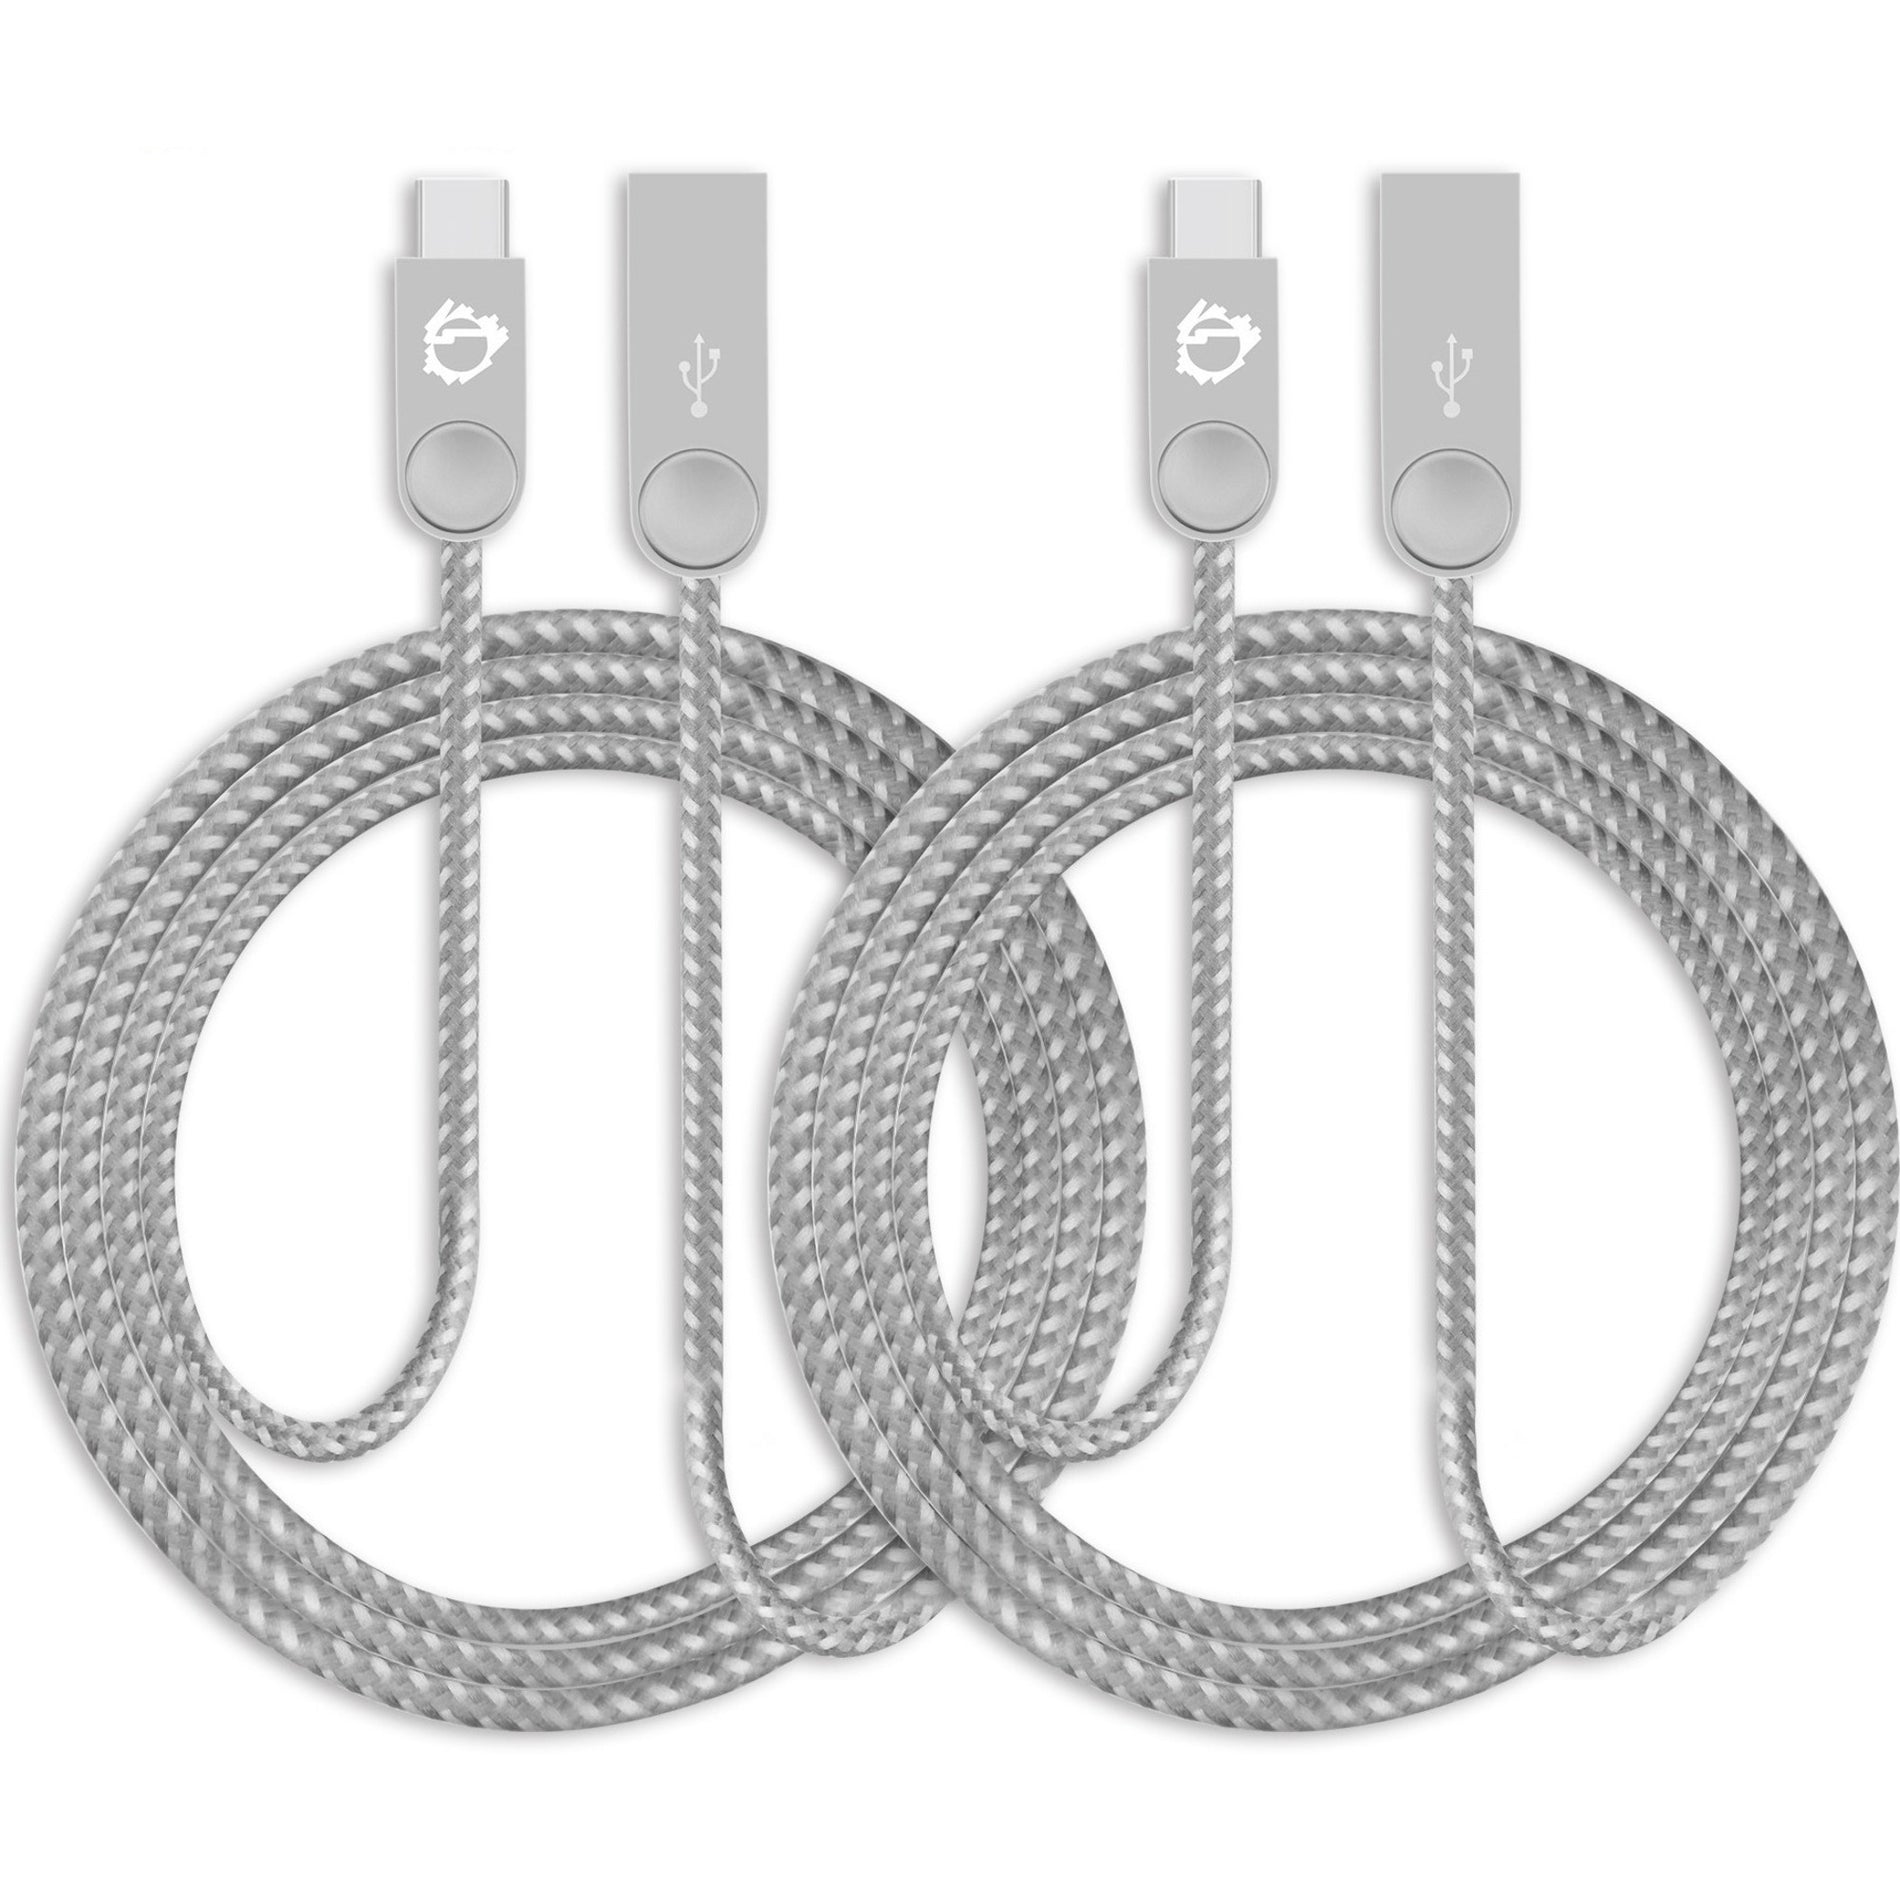 SIIG CB-US0M11-S1 Zinc Alloy USB-C to USB-A Charging & Sync Braided Cable - 3.3ft, 2-Pack, Durable and Reversible